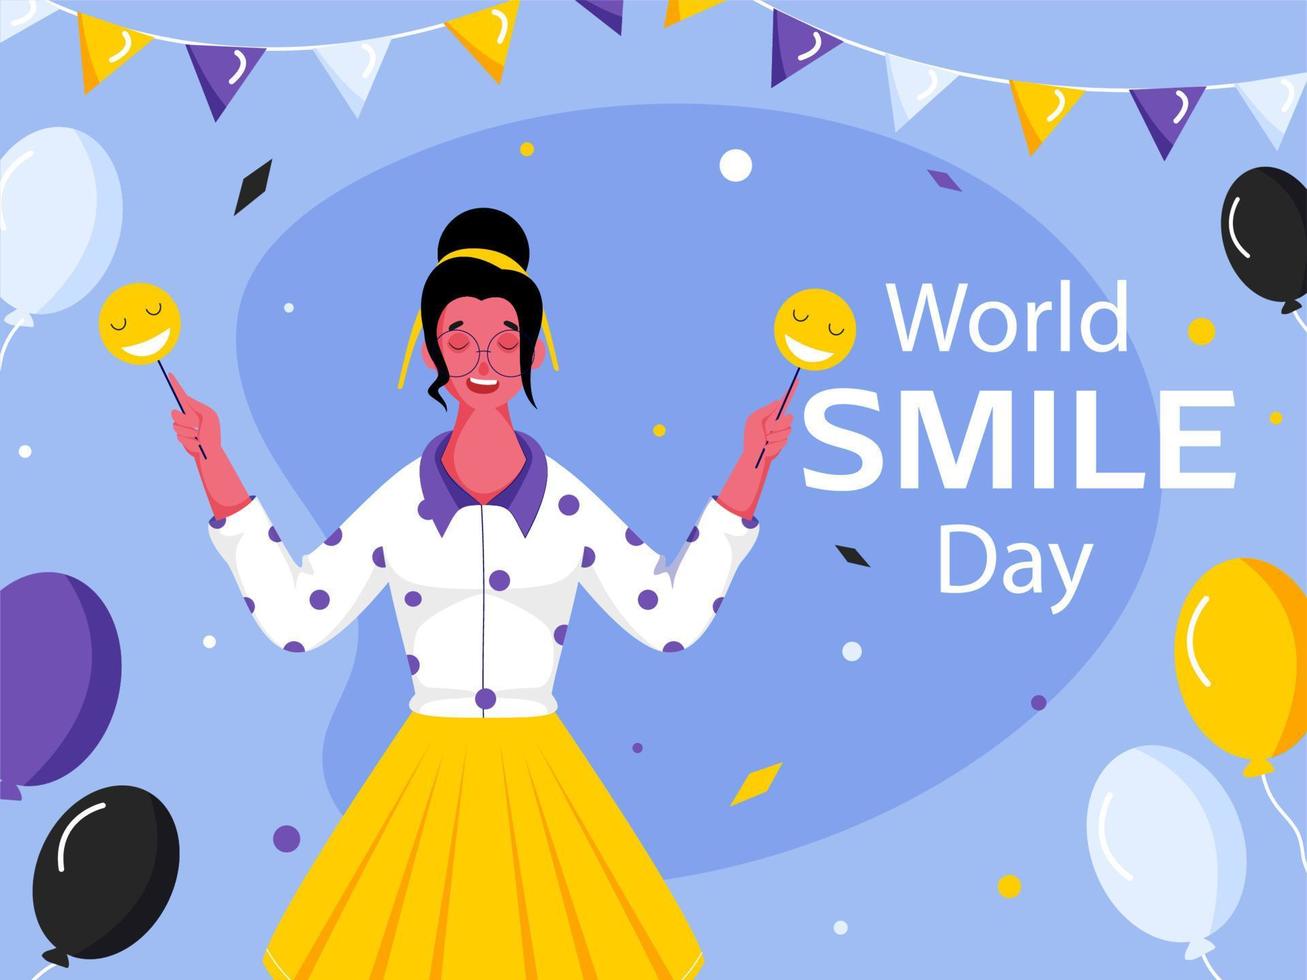 World Smile Day Poster Design with Young Girl Holding Smiley Emoji Sticks, Balloons and Bunting Flags Decorated Blue Background. vector